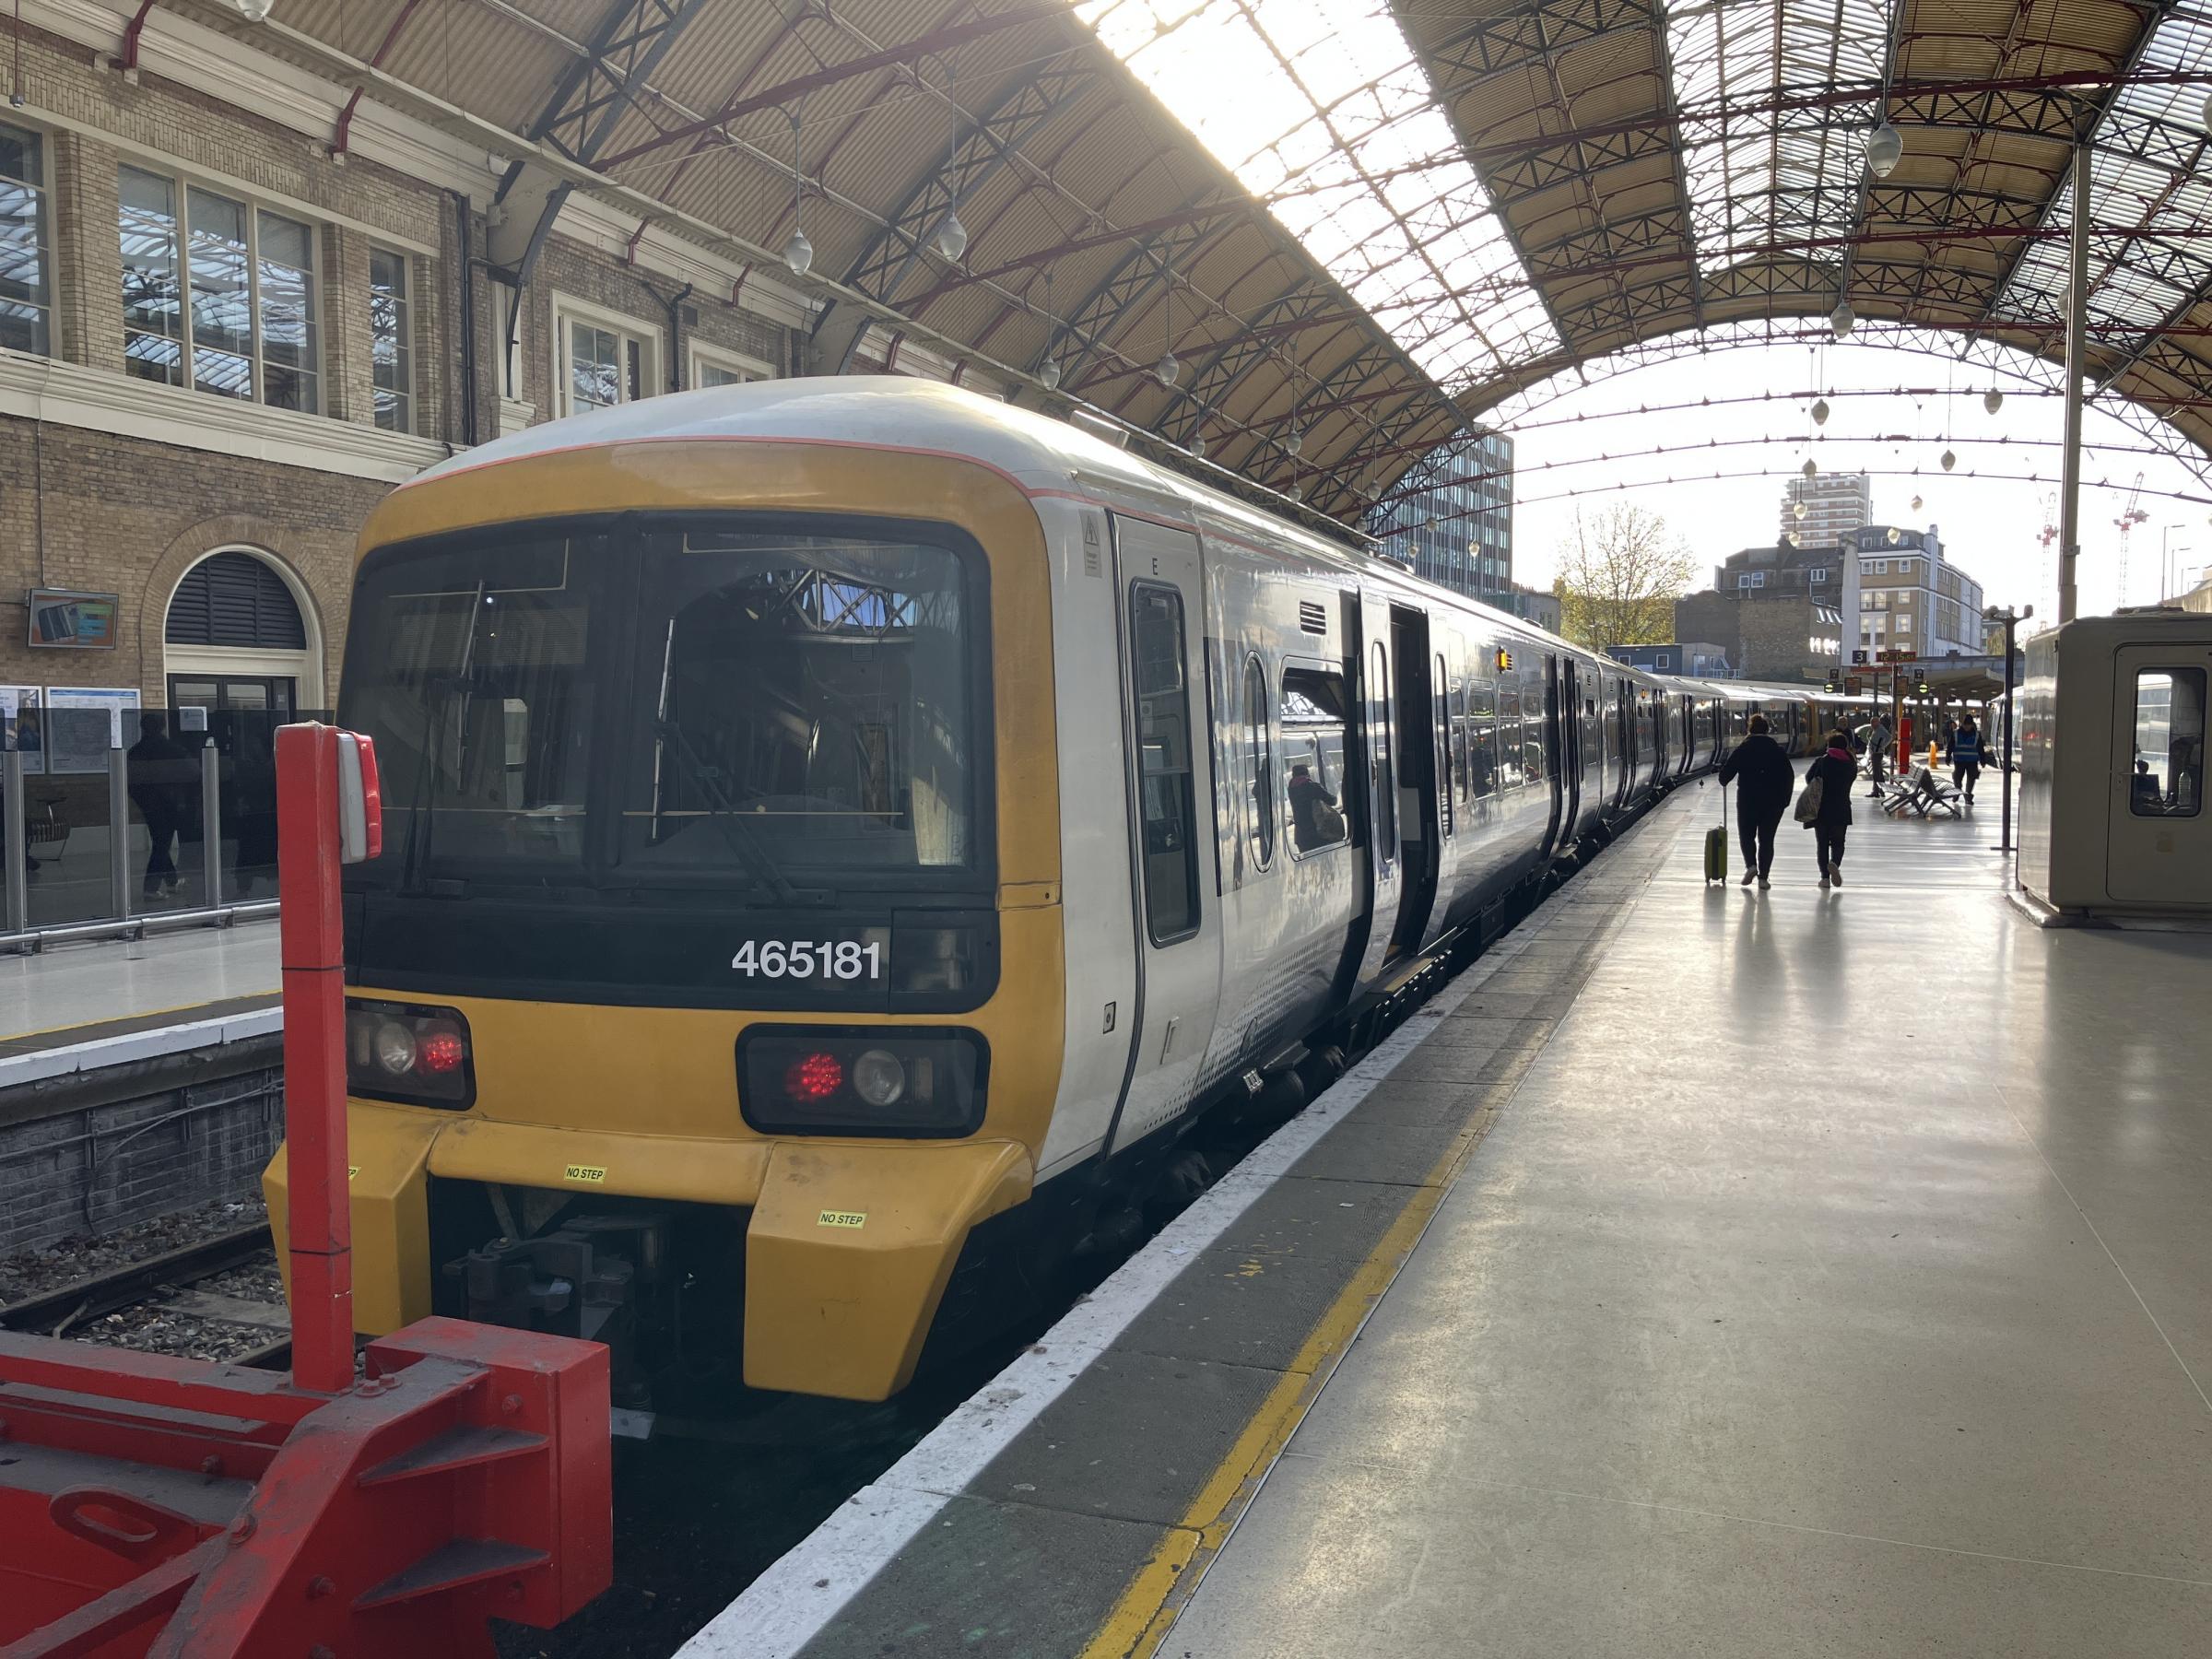 A Southeastern Rail train shown at Victoria station in London. Permission for use by all LDRS partners. Credit: Joe Coughlan